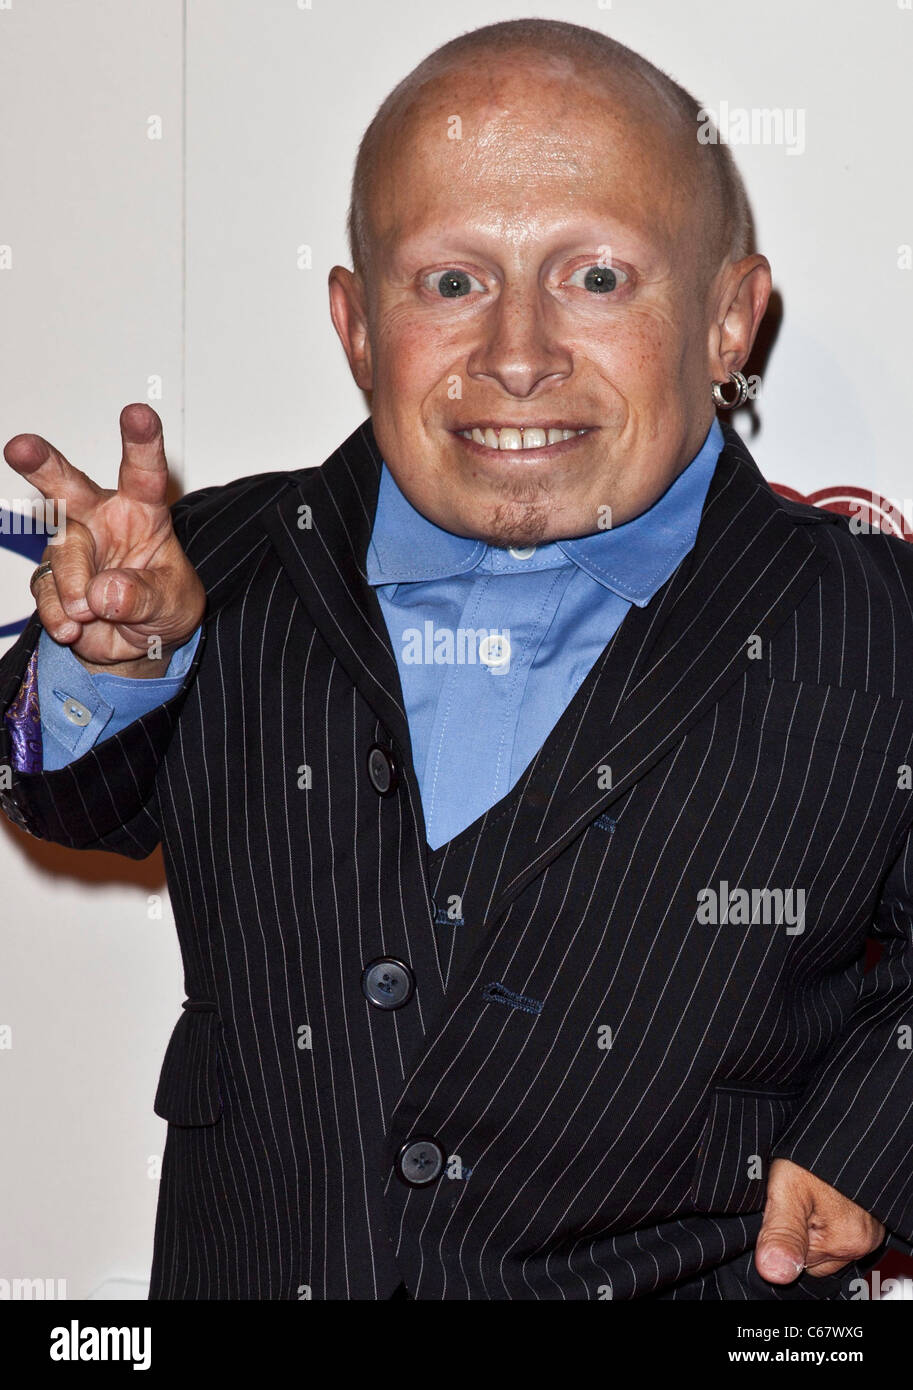 Verne Troyer at arrivals for 26th Anniversary Sports Spectacular, Hyatt Regency Century Plaza Hotel, Los Angeles, CA May 22, 2011. Photo By: Emiley Schweich/Everett Collection Stock Photo